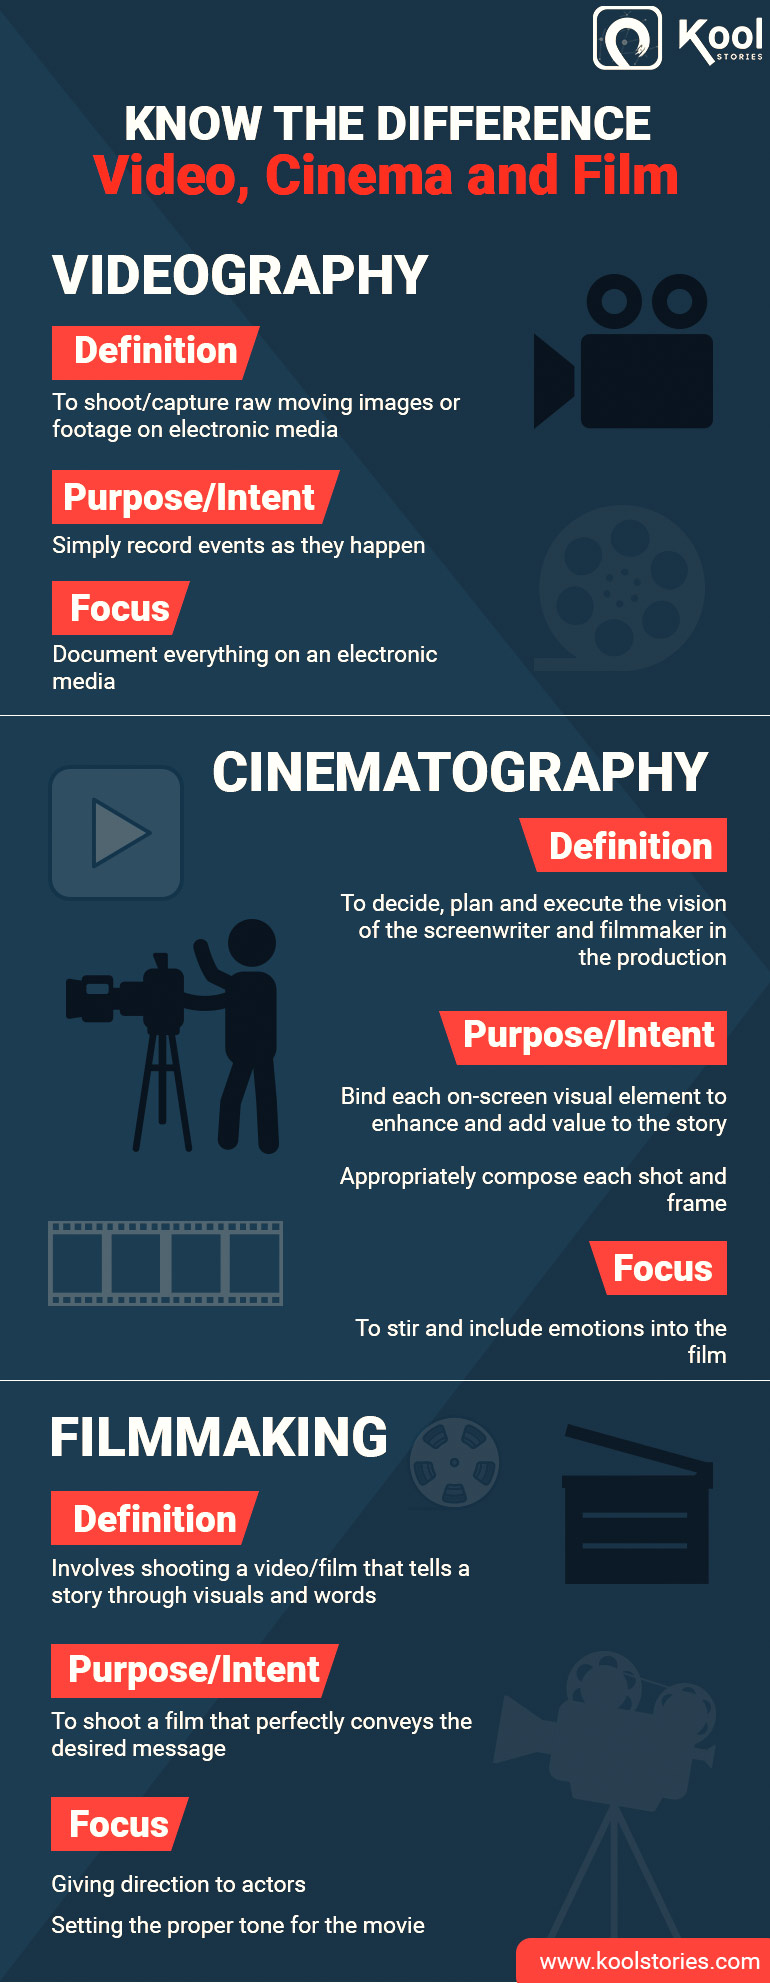 Know the difference between video, camera and film